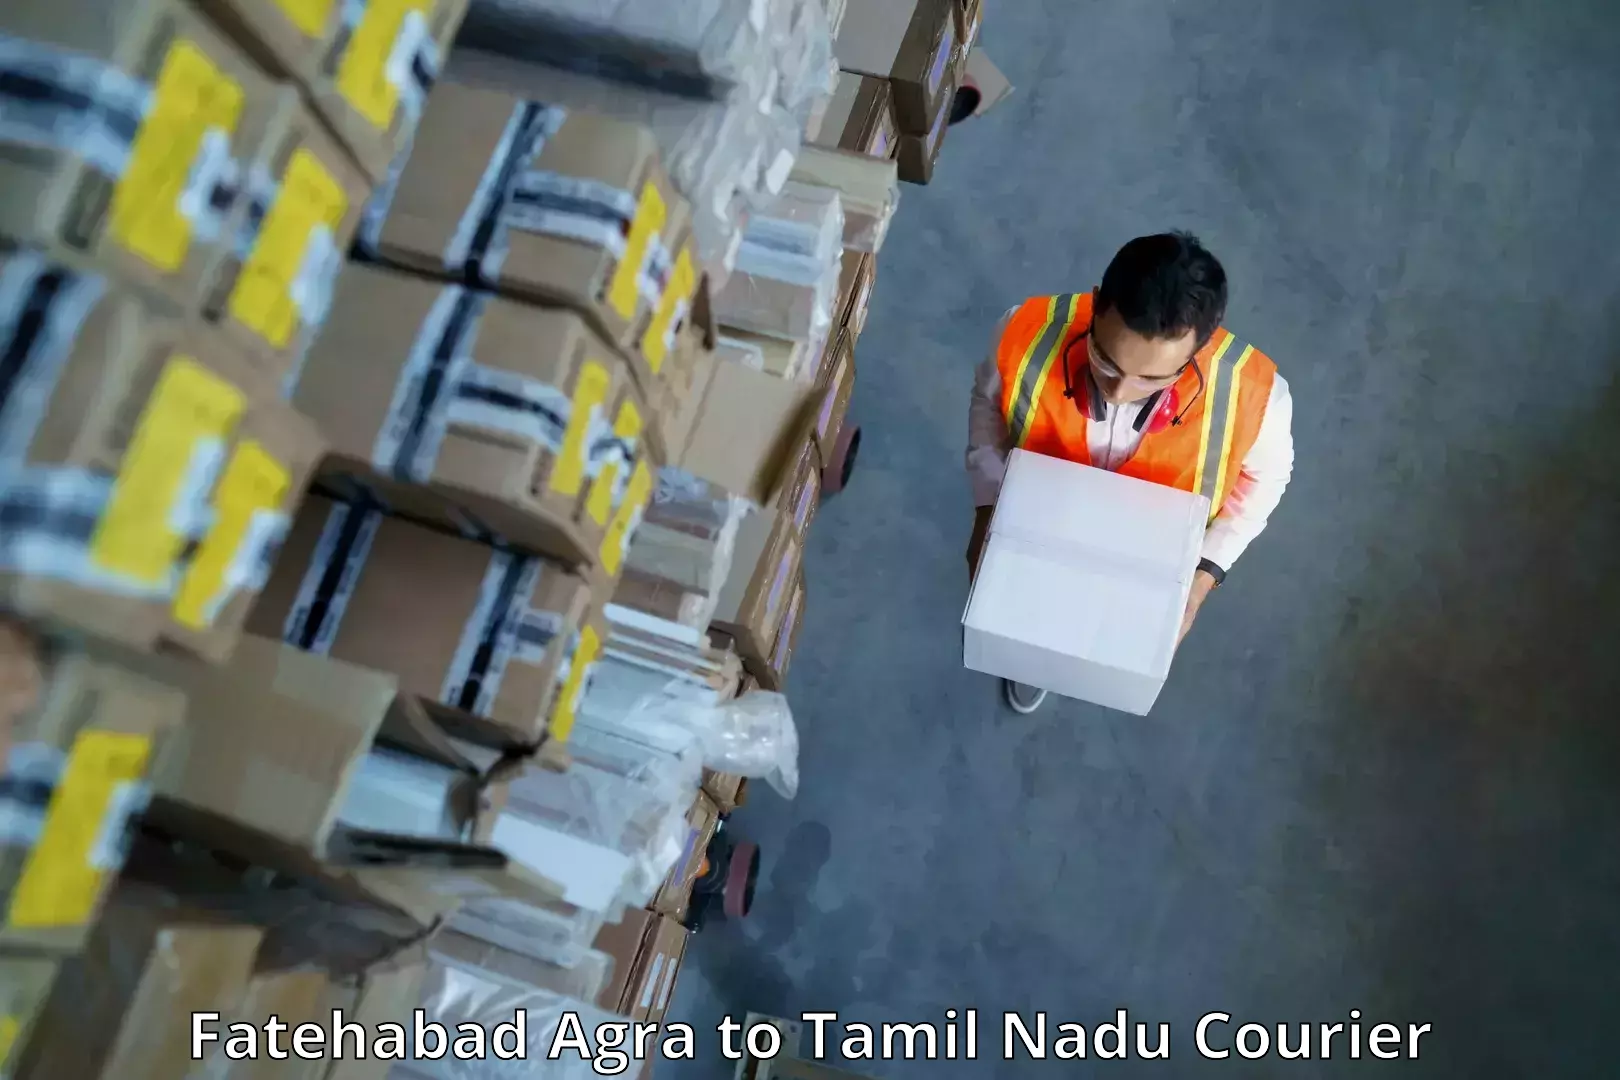 Custom courier packaging Fatehabad Agra to Chennai